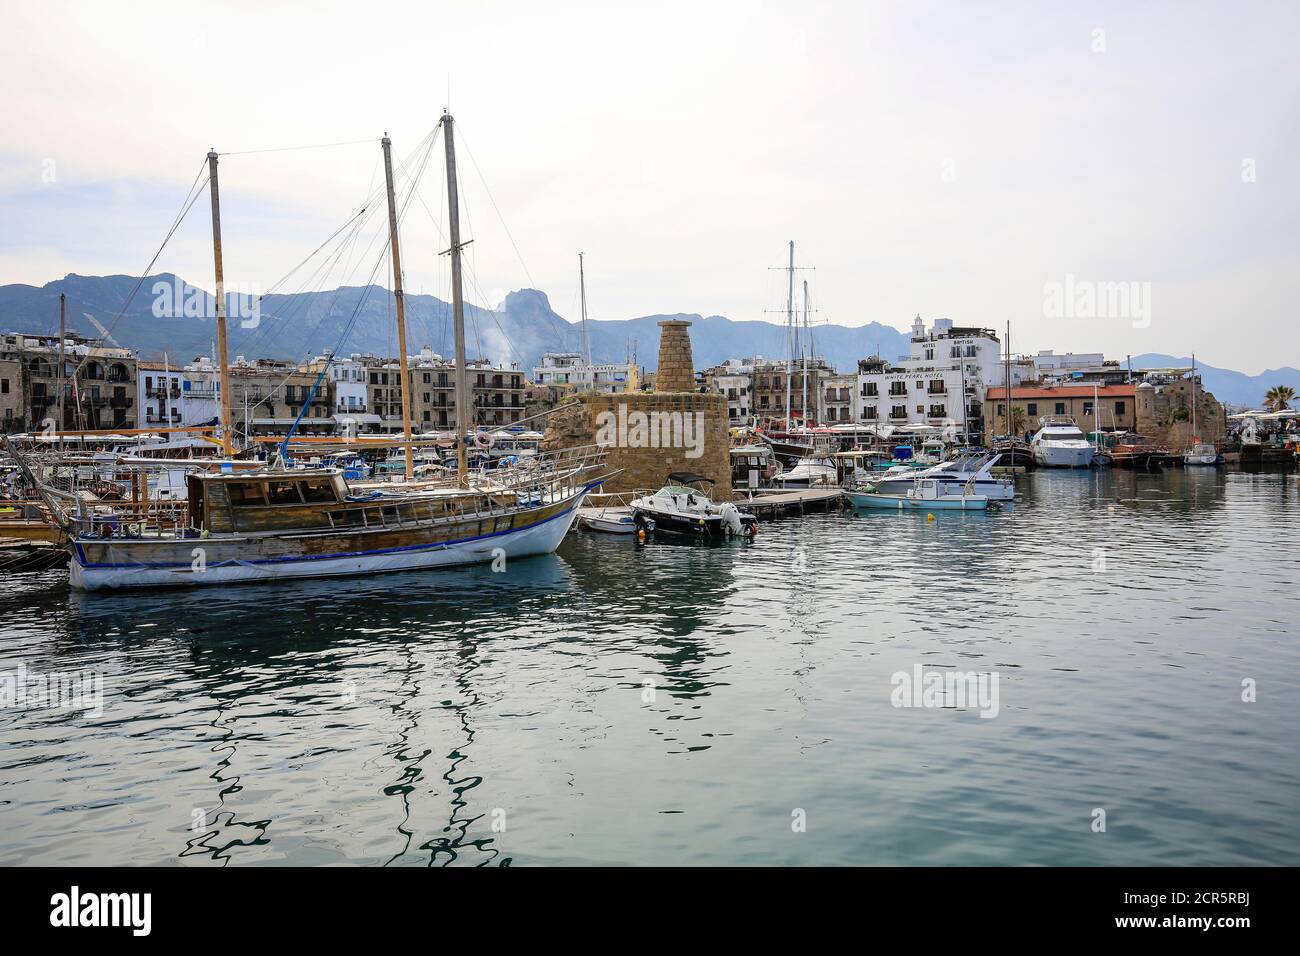 Girne, Turkish Republic of Northern Cyprus, Cyprus - Boats and sailing ships in the port of Girne (Kyrenia). Stock Photo